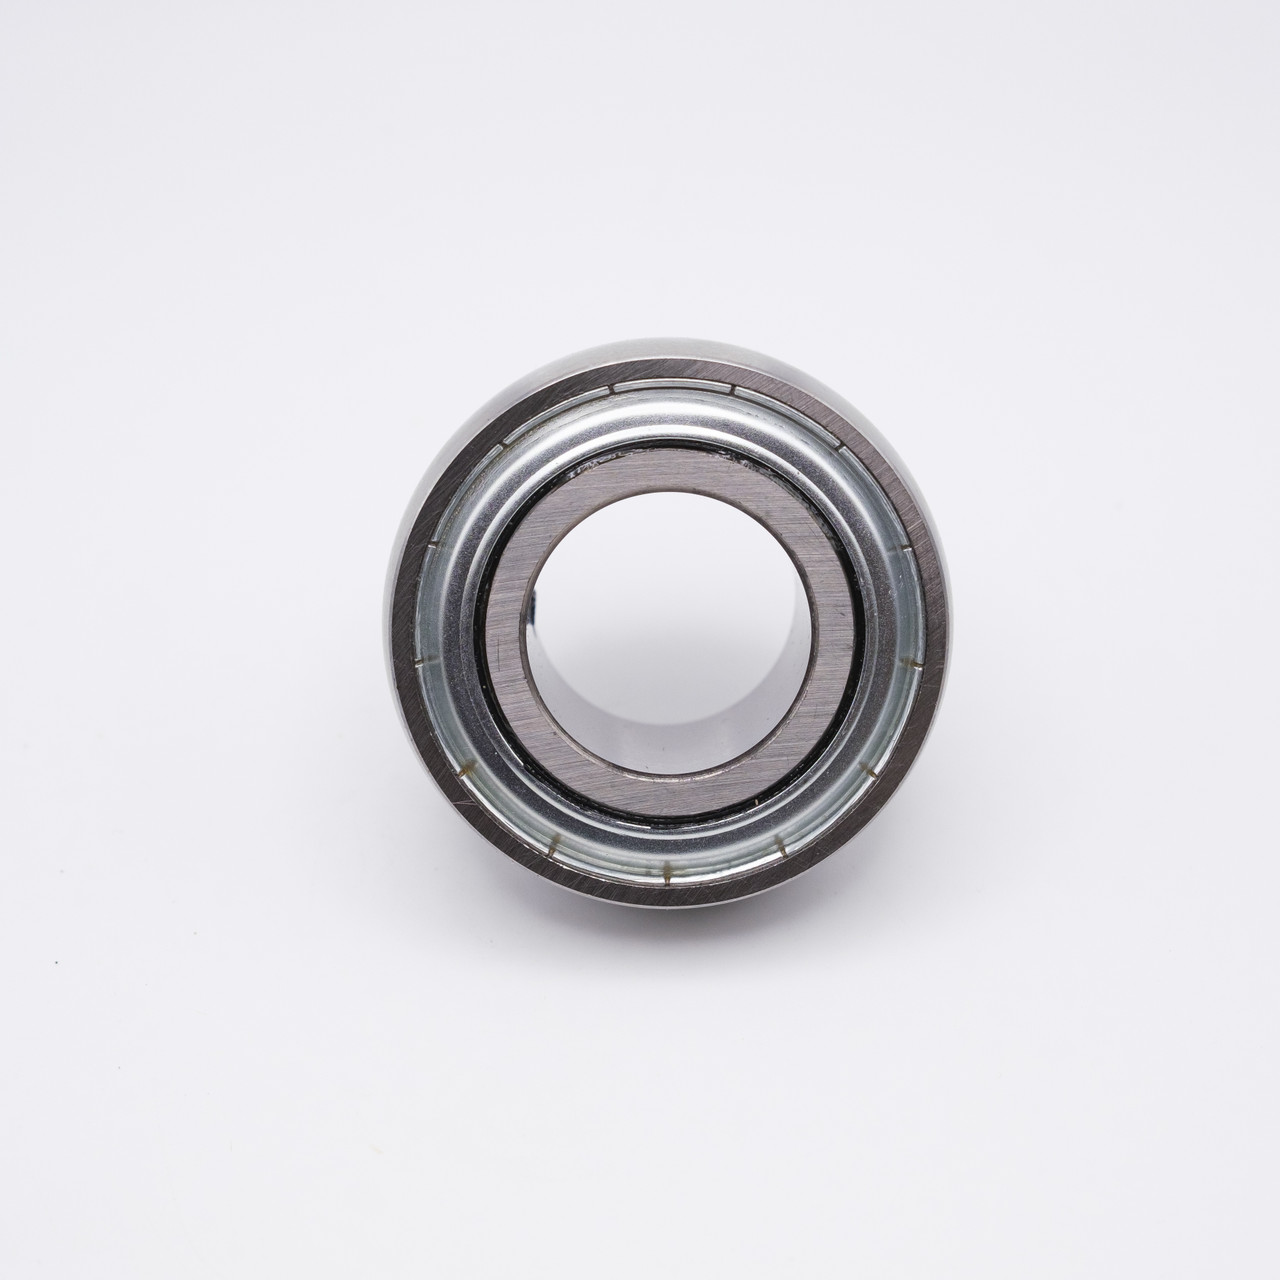 SB205-15 Crowned Outer Insert Bearing 15/16x52x15mm Back View